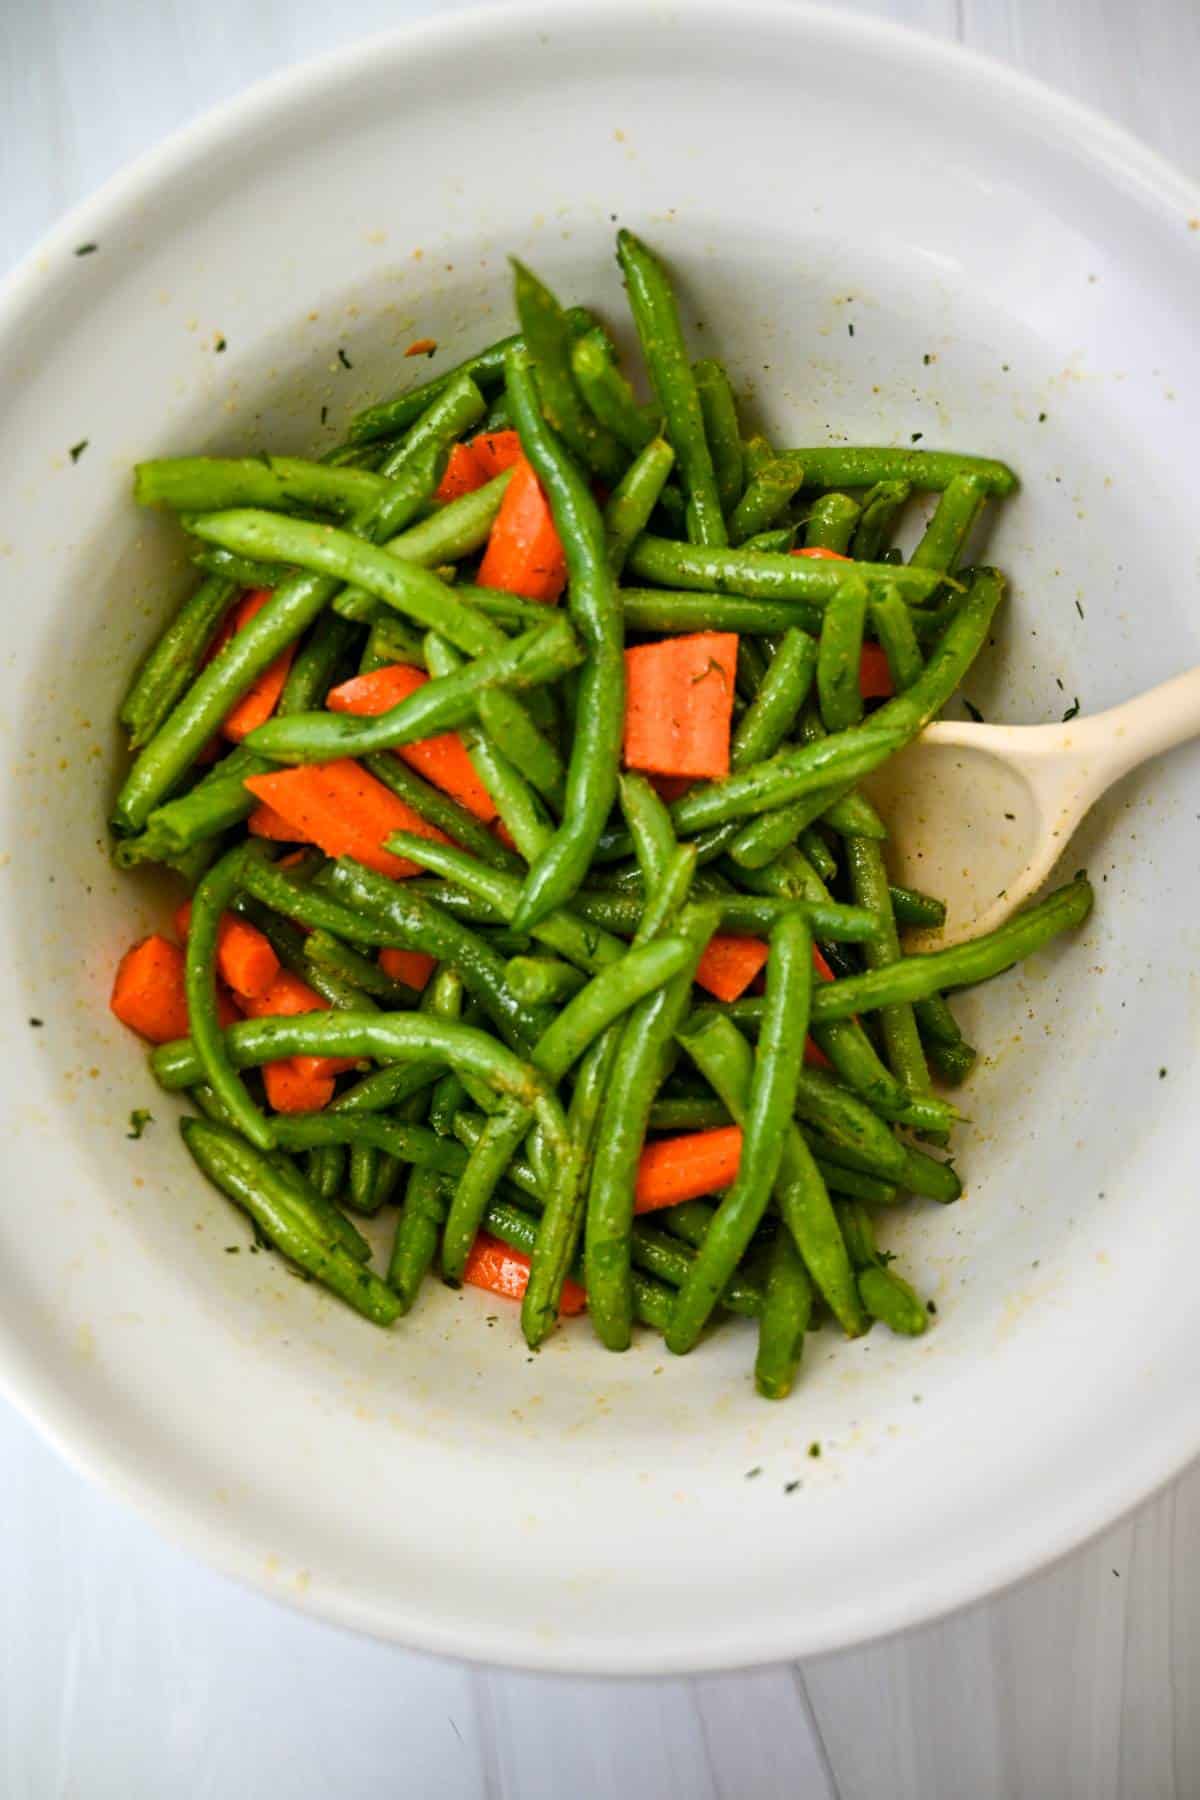 fresh carrots and green beans tossed with olive oil and seasonings in a white bowl